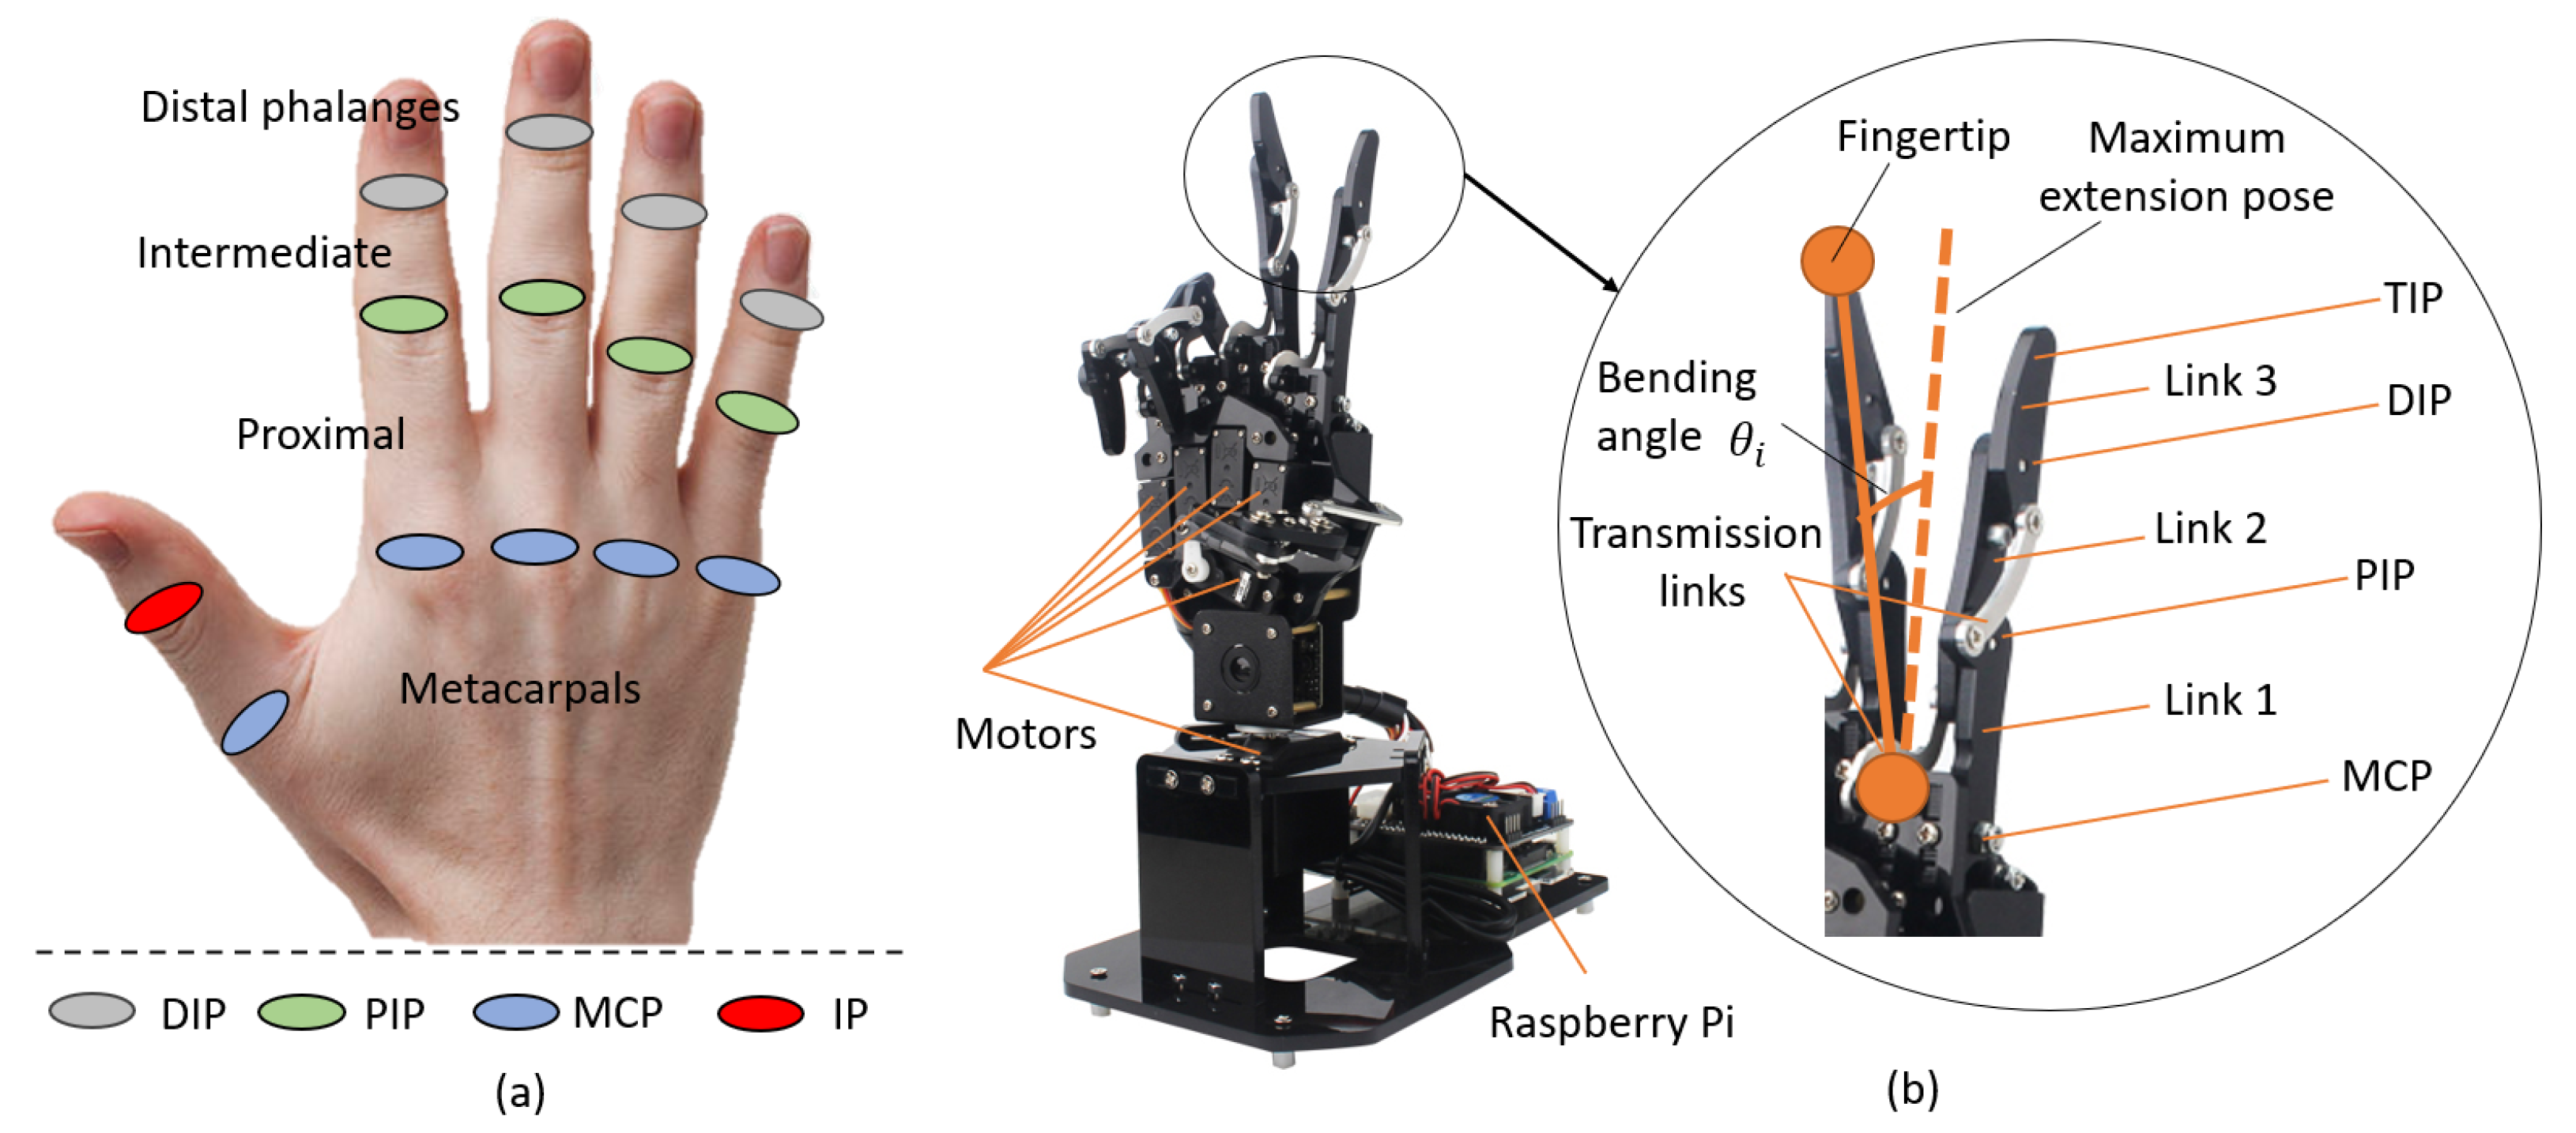 Robotics | Free Full-Text | Teleoperation Control of an Underactuated Bionic Hand: Comparison between Wearable and Vision-Tracking-Based